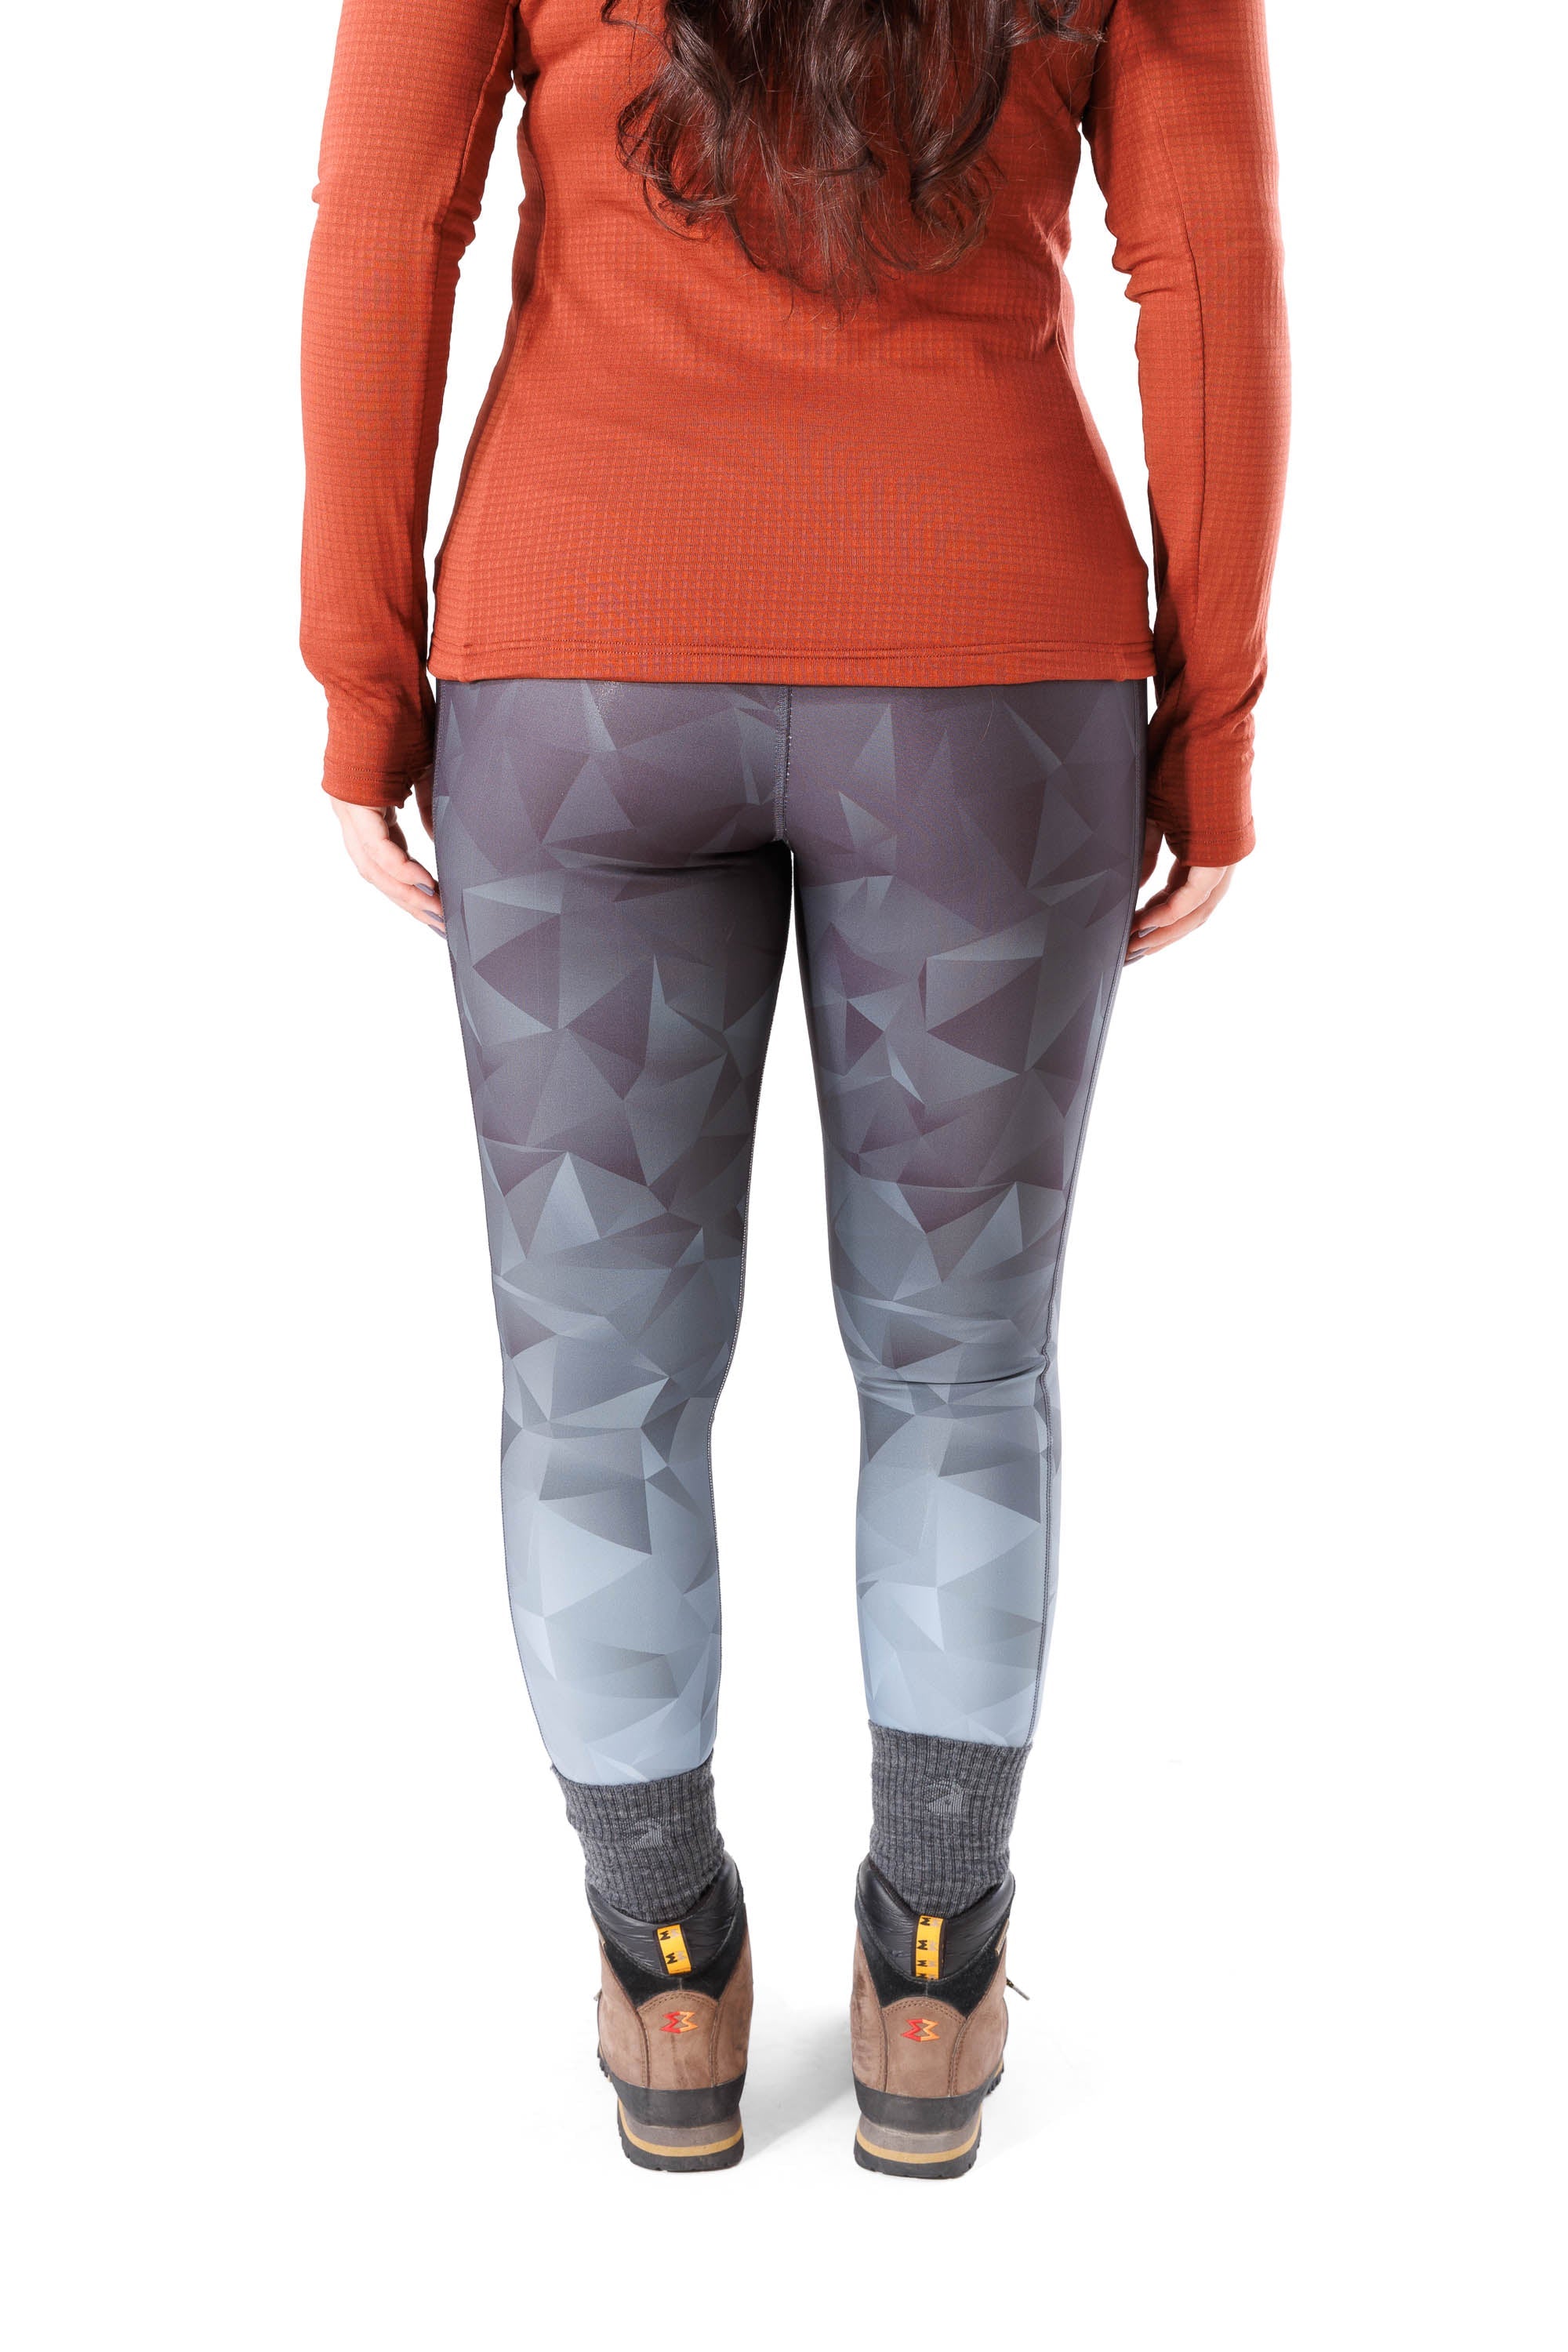 APEX Winter Leggings Misty Forest – Alpine Nation Outdoor Clothing